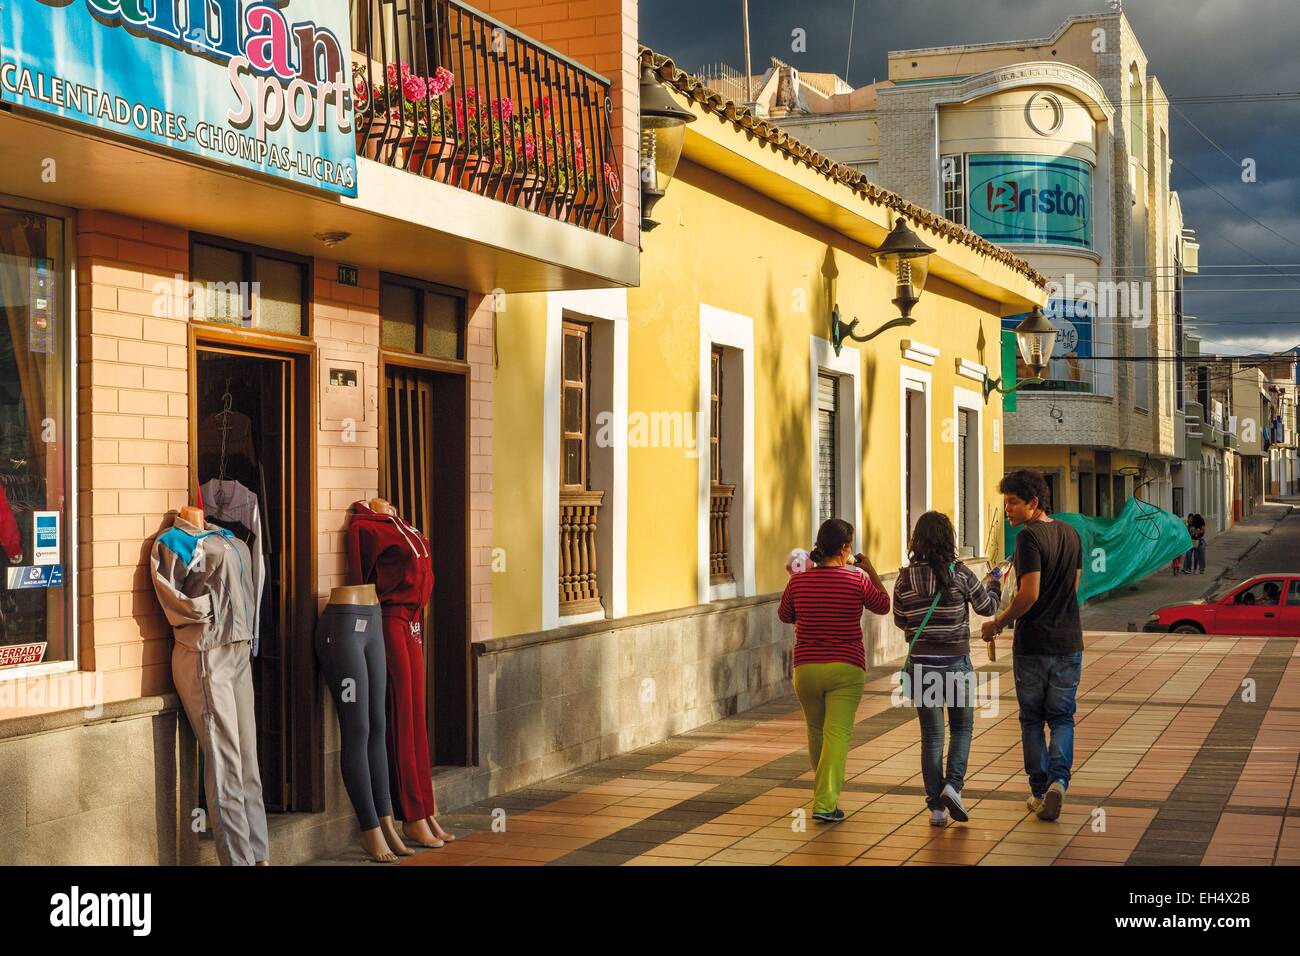 Ecuador, Imbabura, Atuntaqui, street scene of people passing in front of a clothing store on stormy sky at sunset Stock Photo